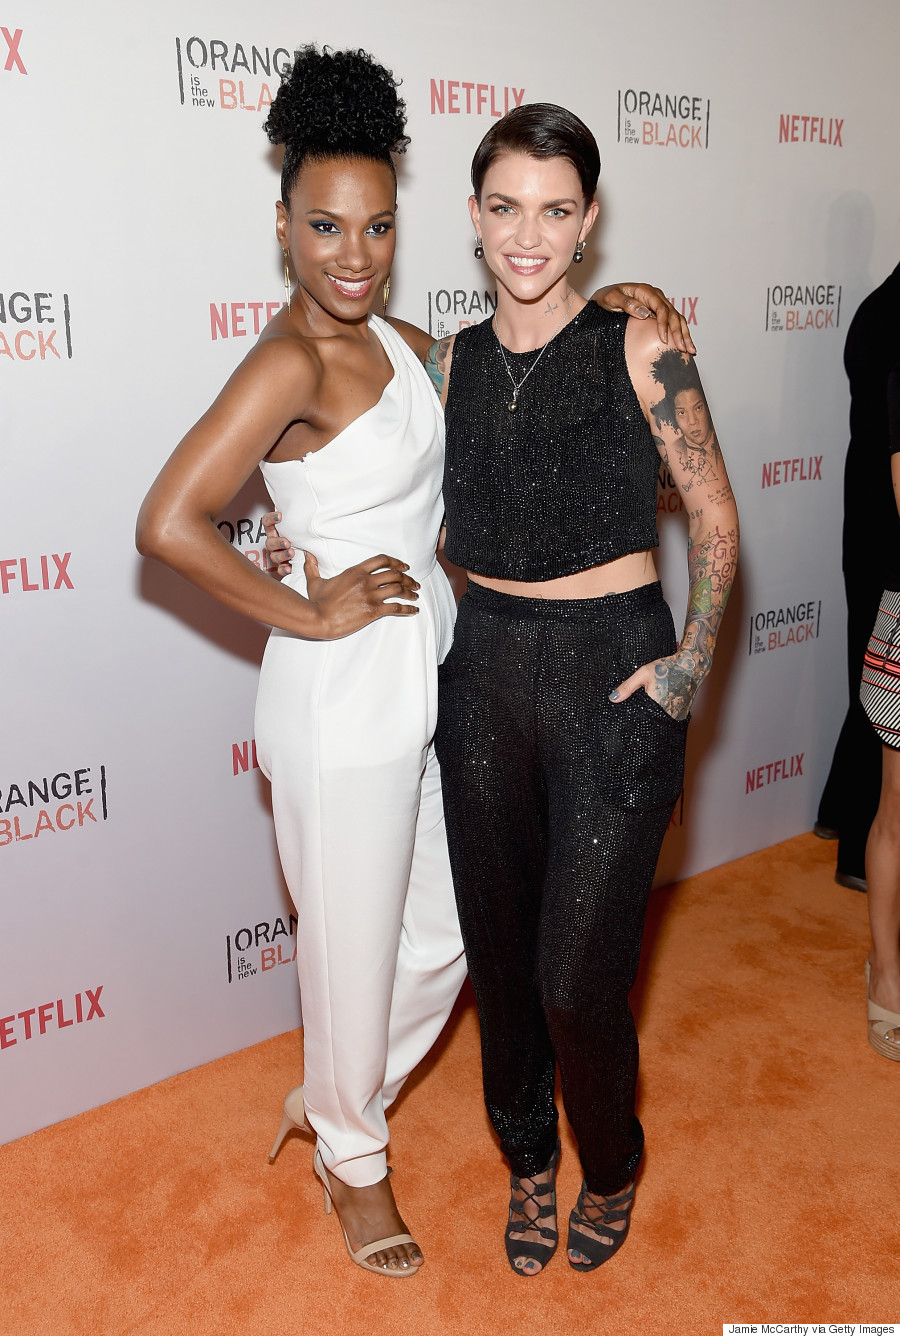 The Cast Of 'Orange Is The Black' It On The OrangeCon Red Carpet | HuffPost Entertainment